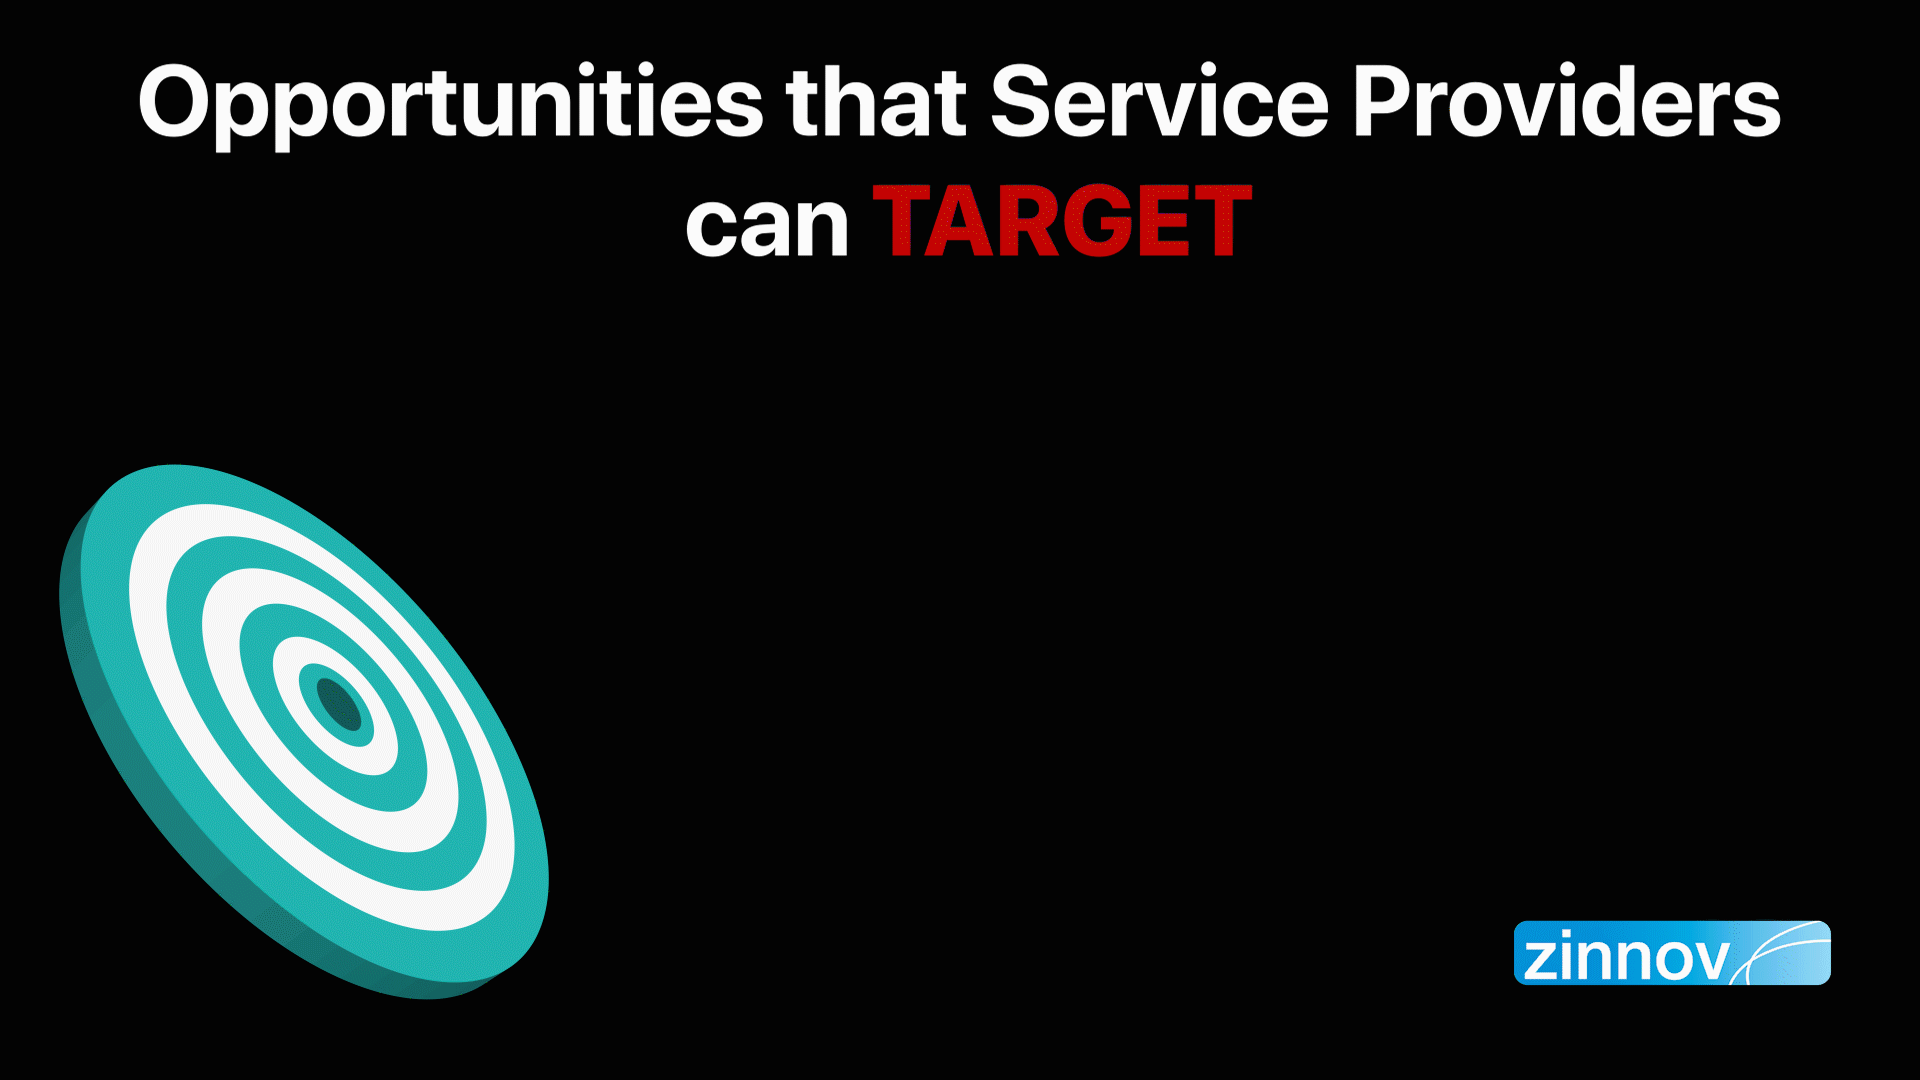 Opportunities for Service Providers